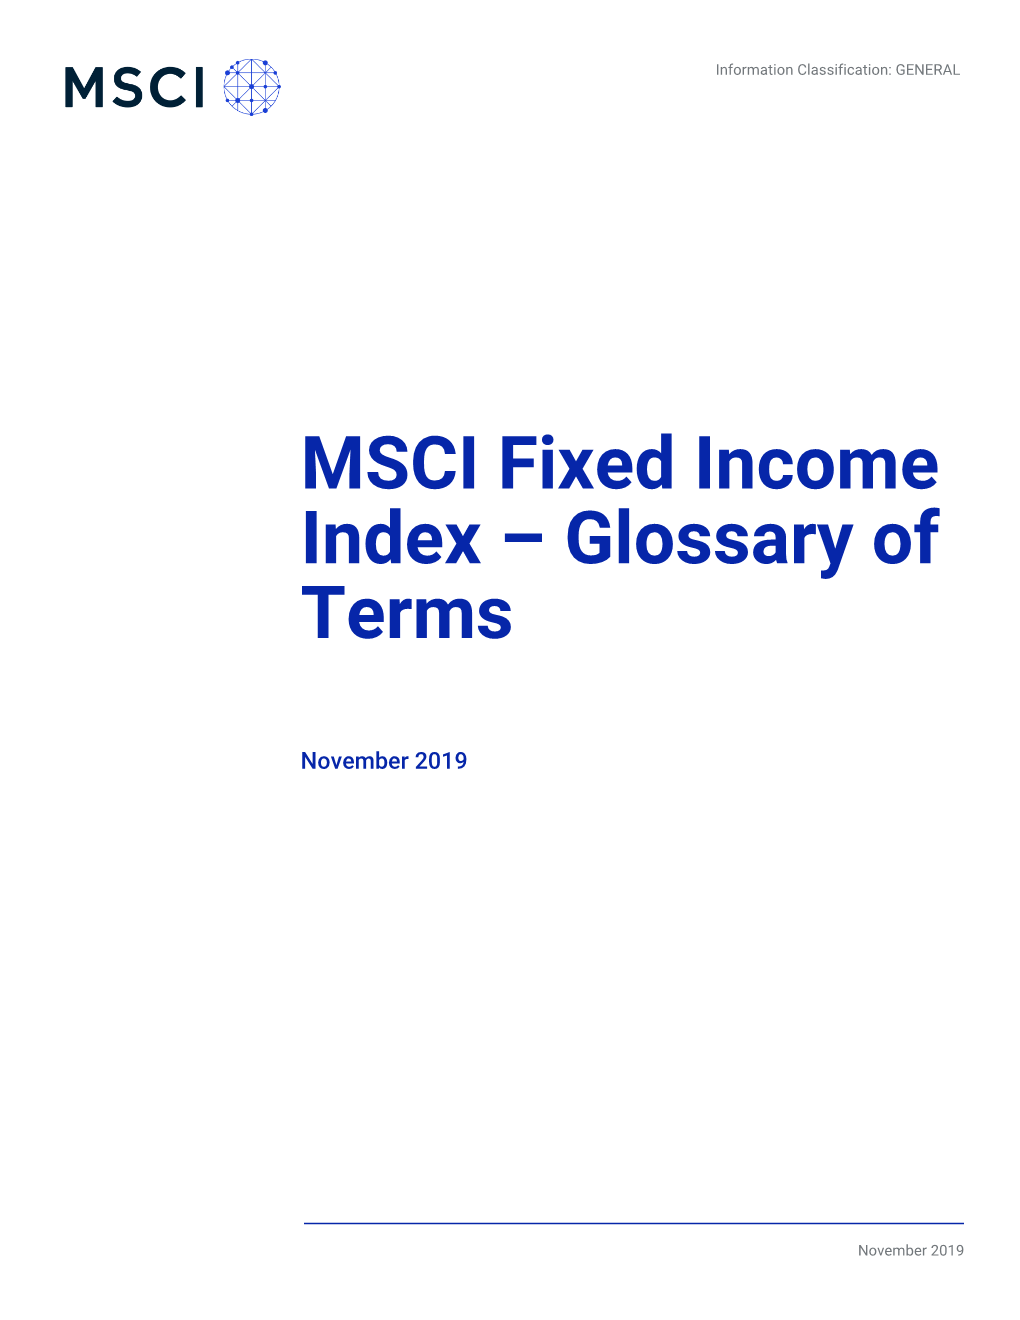 MSCI Fixed Income Index – Glossary of Terms